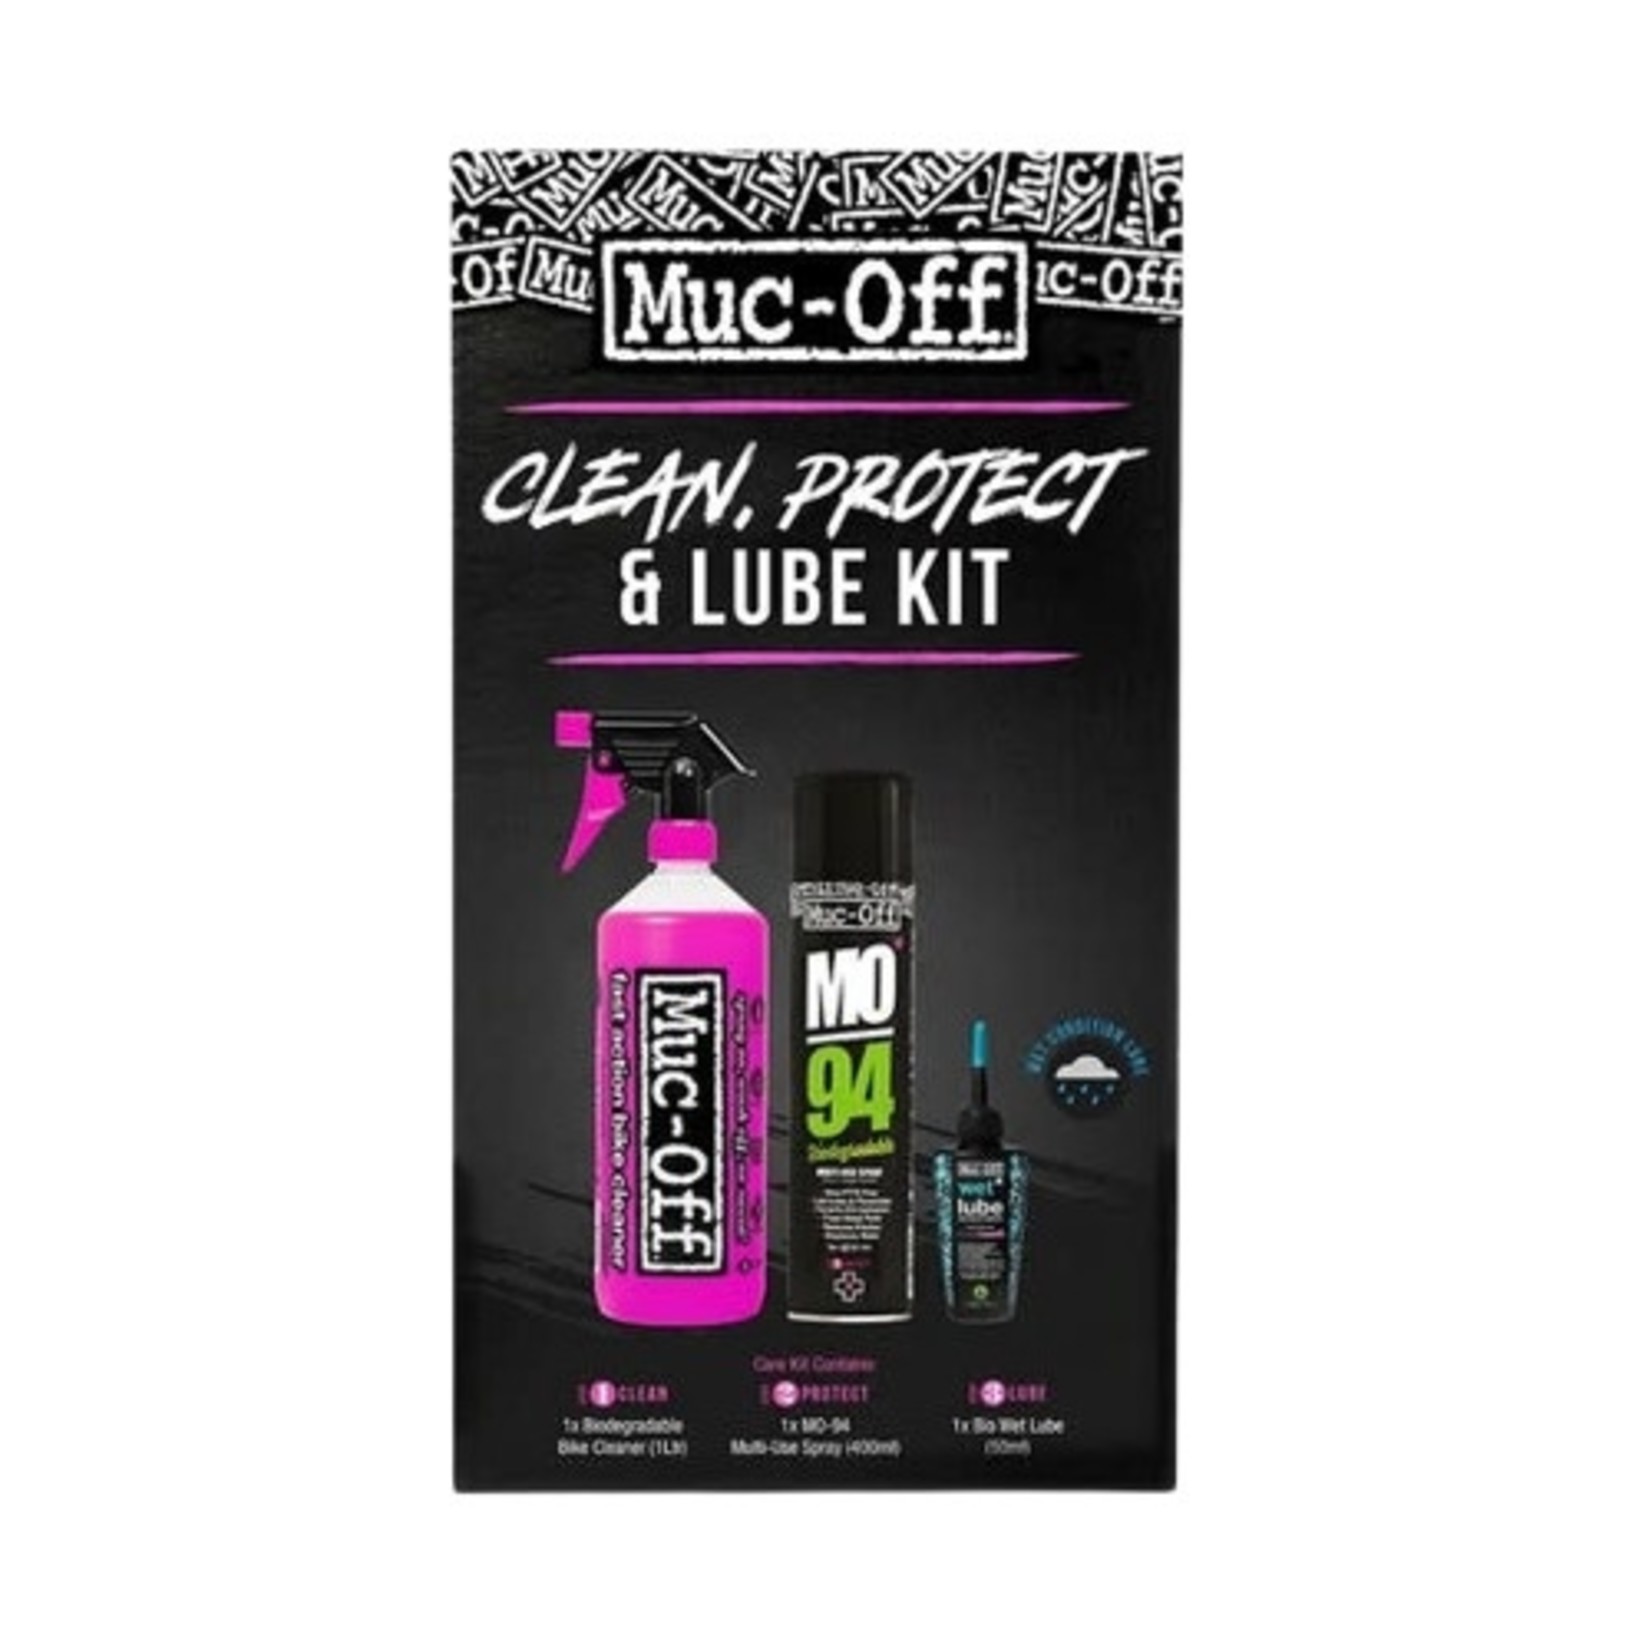 Muc-Off MCF Kit Clean/Protect/Lube - Wet (5)